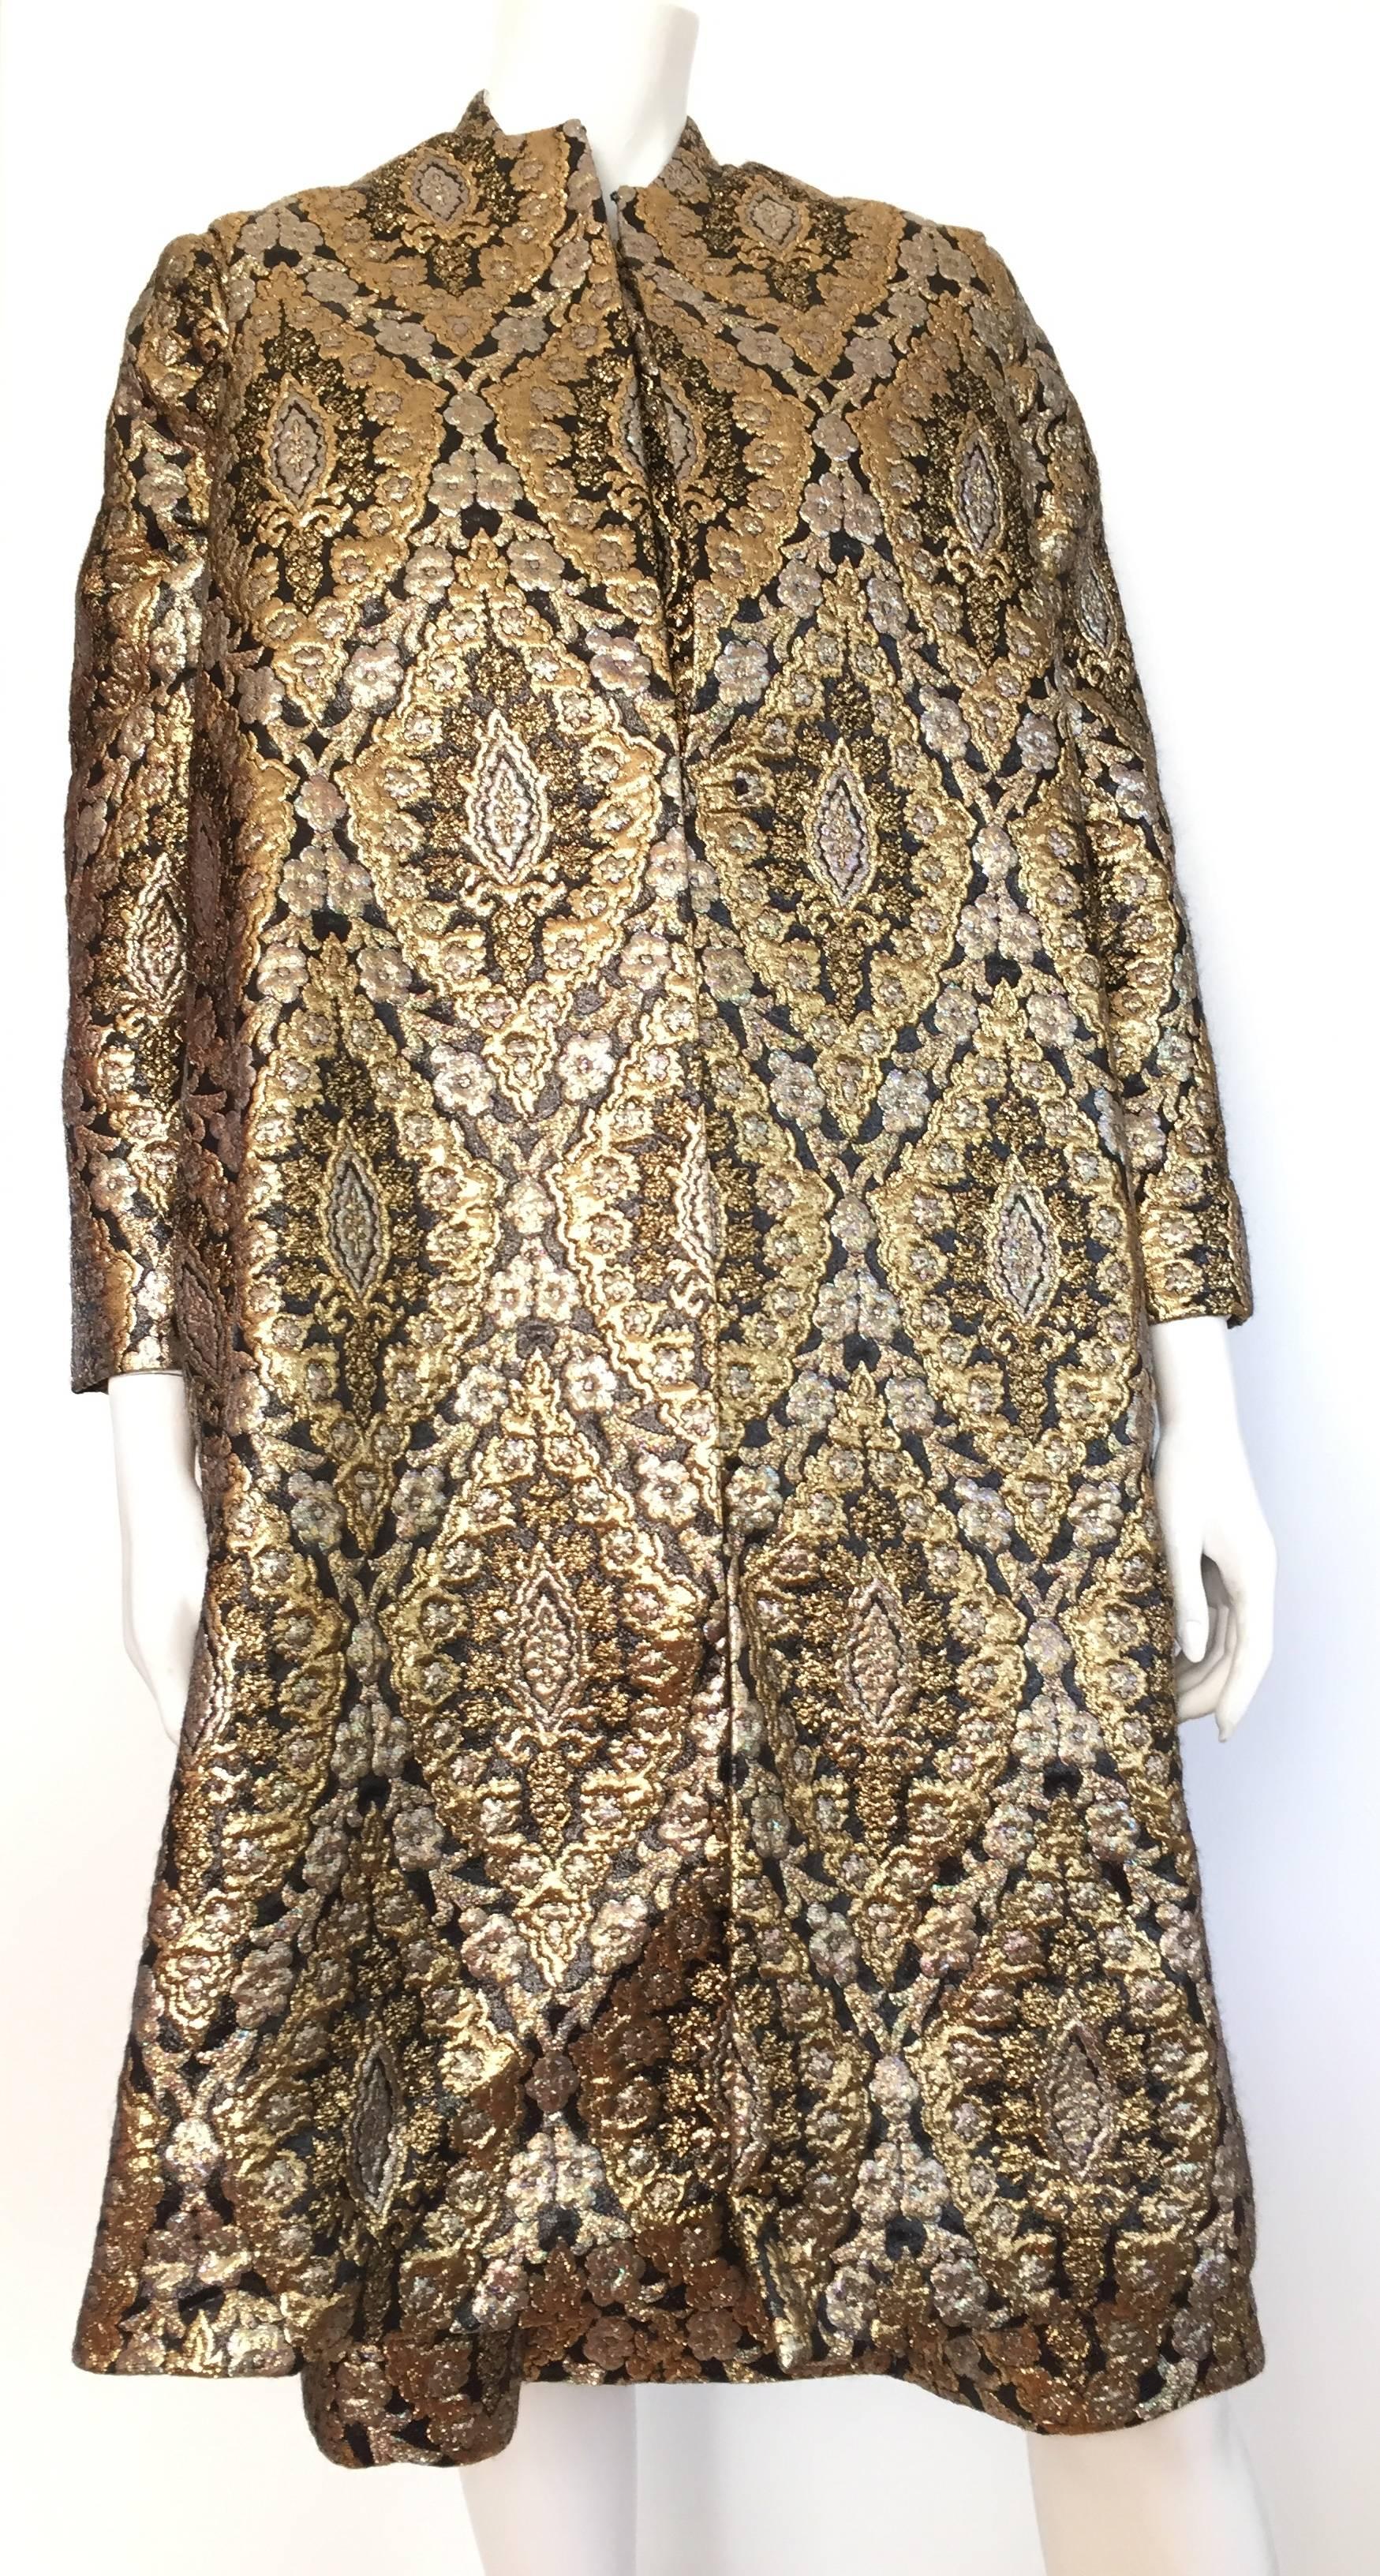 Richard Tam 1961 silk brocade long sleeve evening jacket / coat with matching sleeveless dress is a size 12 / 14 but please see & use measurements below so that you can properly measure your lovely body to make certain this will fit. Remember